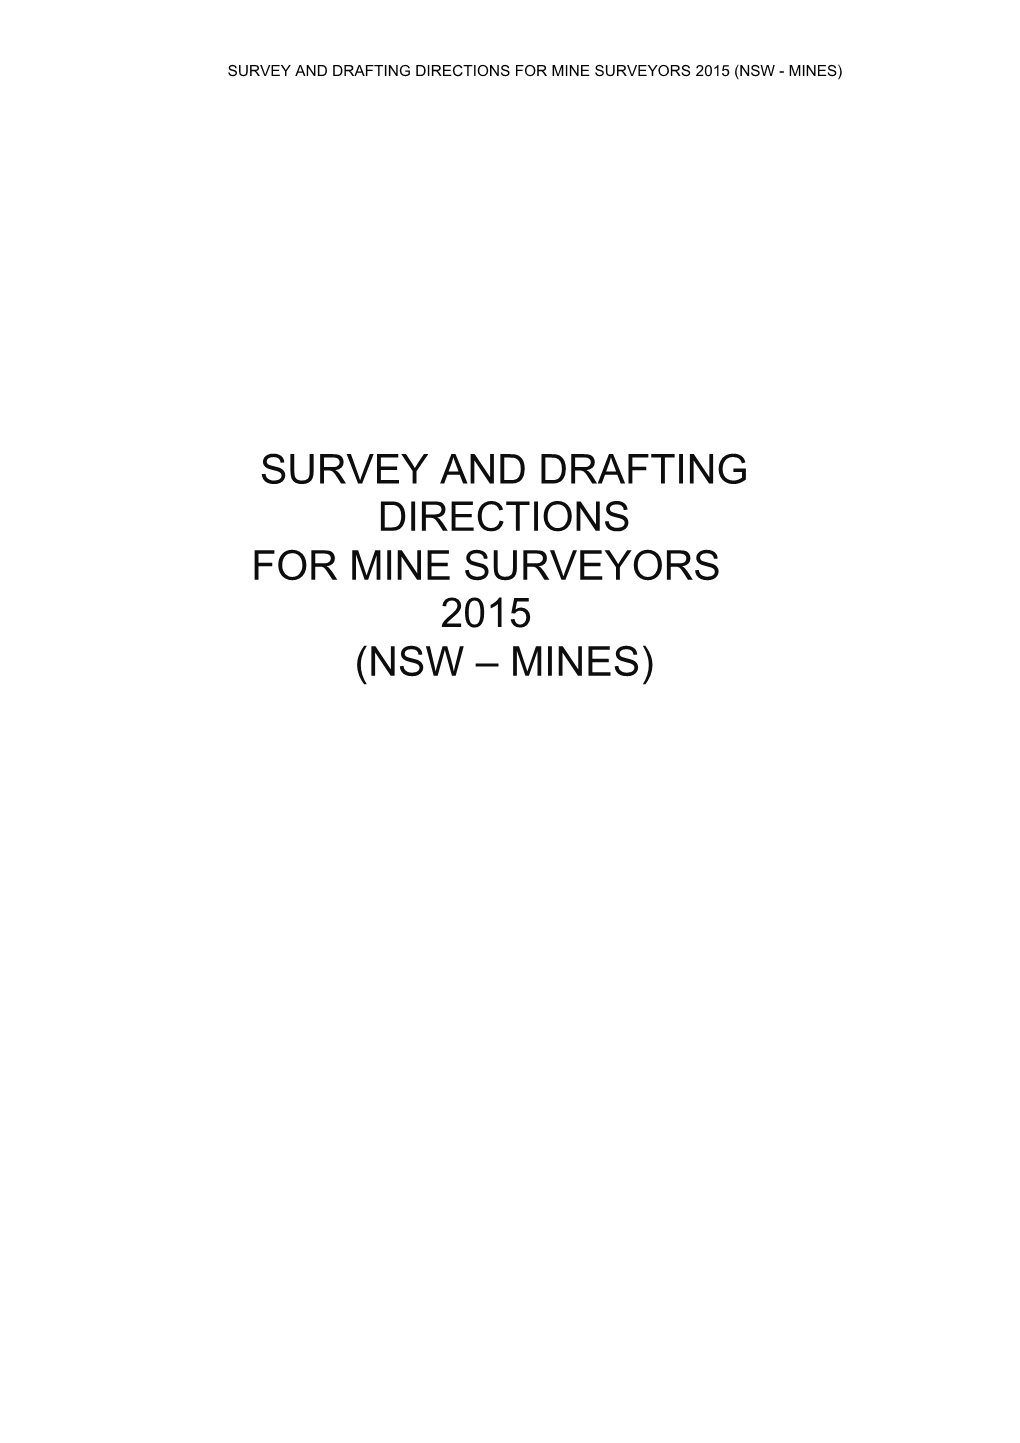 Survey and Drafting Directions for Mine Surveyors 2015 (NSW Mines)